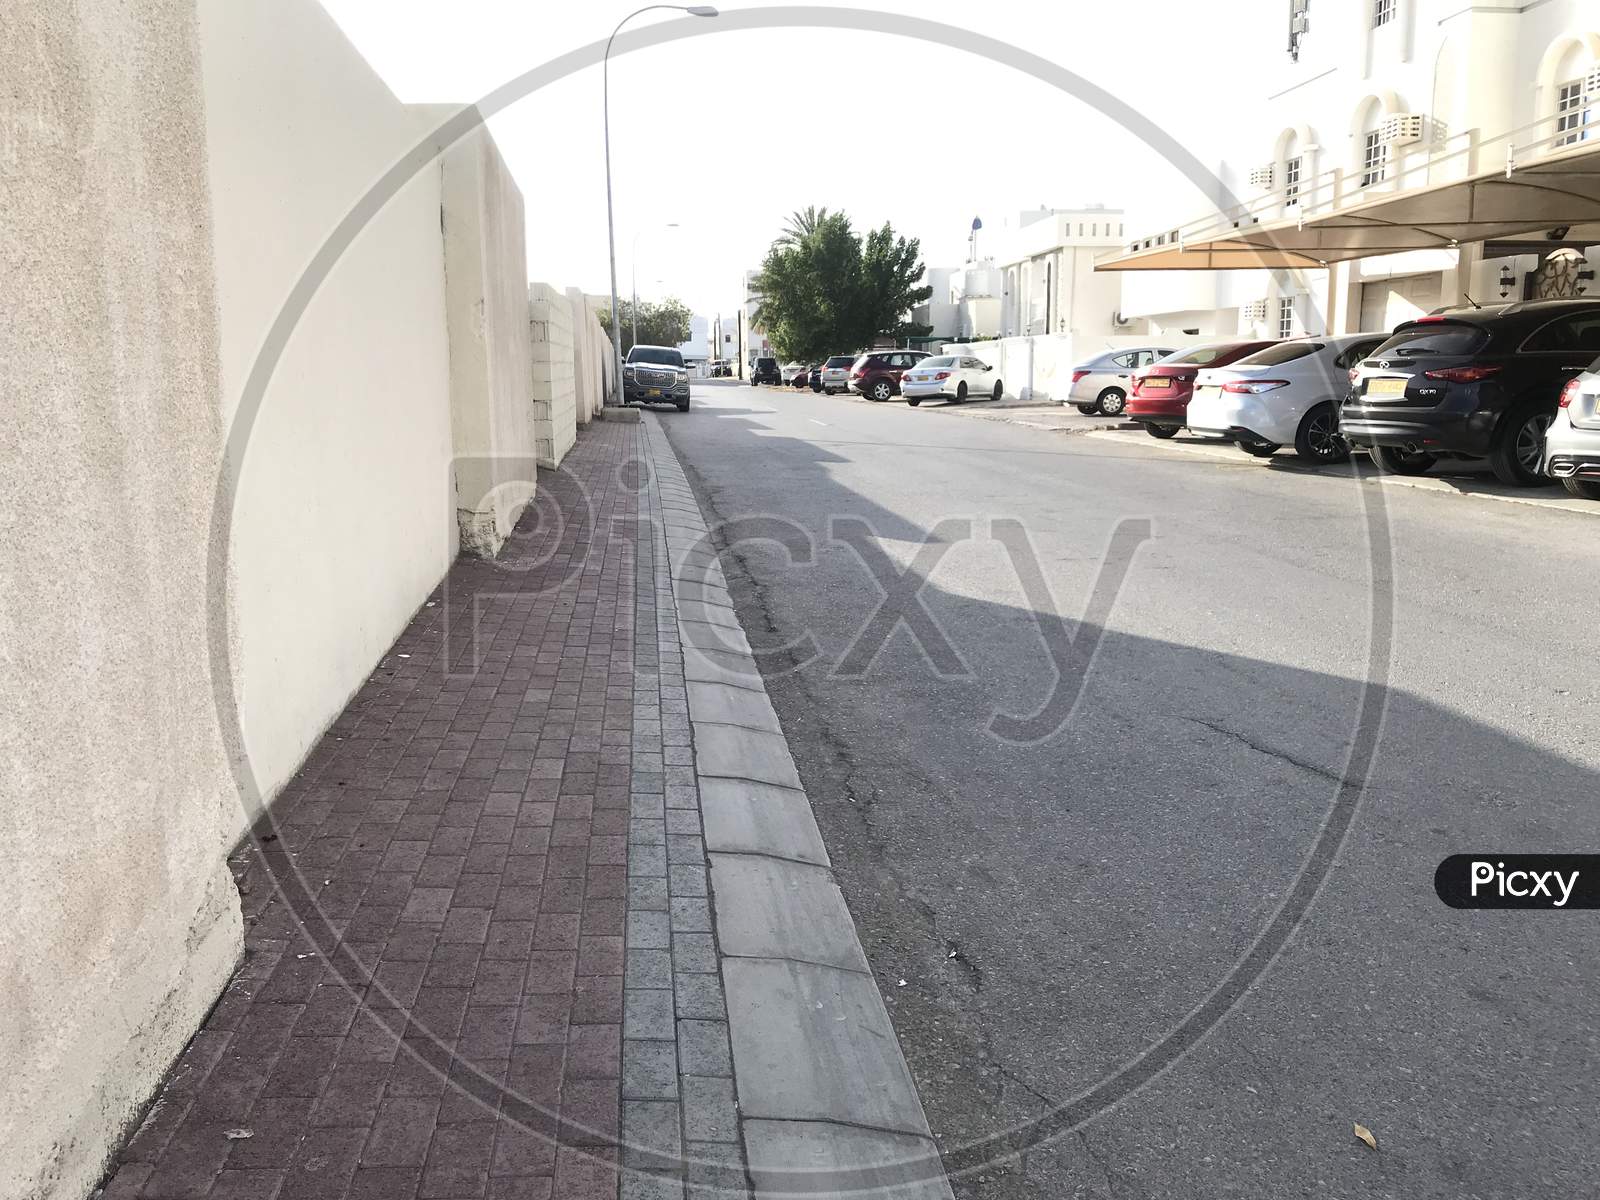 Muscat City Streets Looks So Empty Due To Lock Down Against The Corona Virus Disease Pandemic Combat For The People Staying Safe And Avoid Spreading